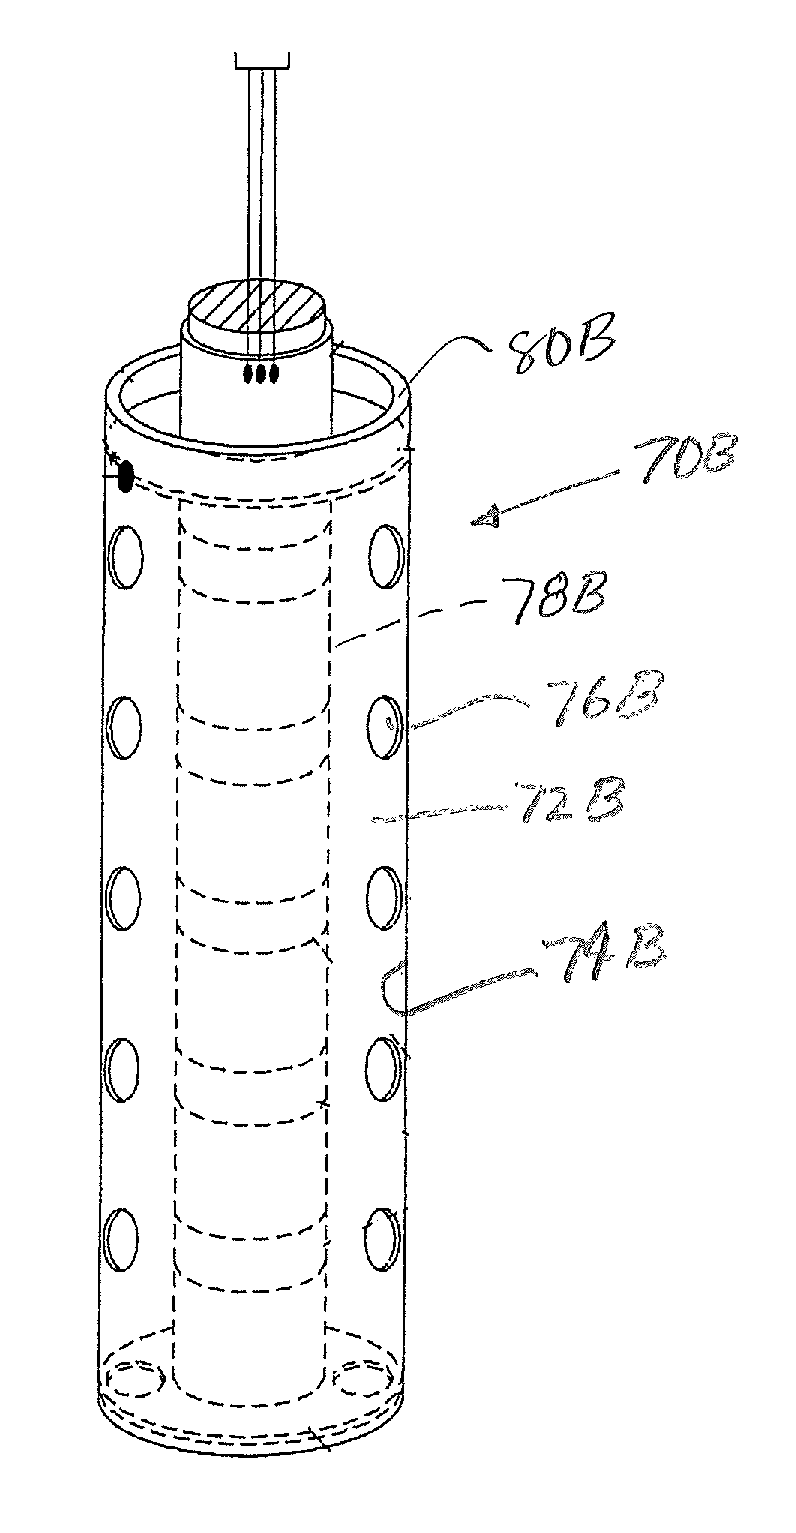 Method and kit for treatment of components utilized in a crude oil service operation